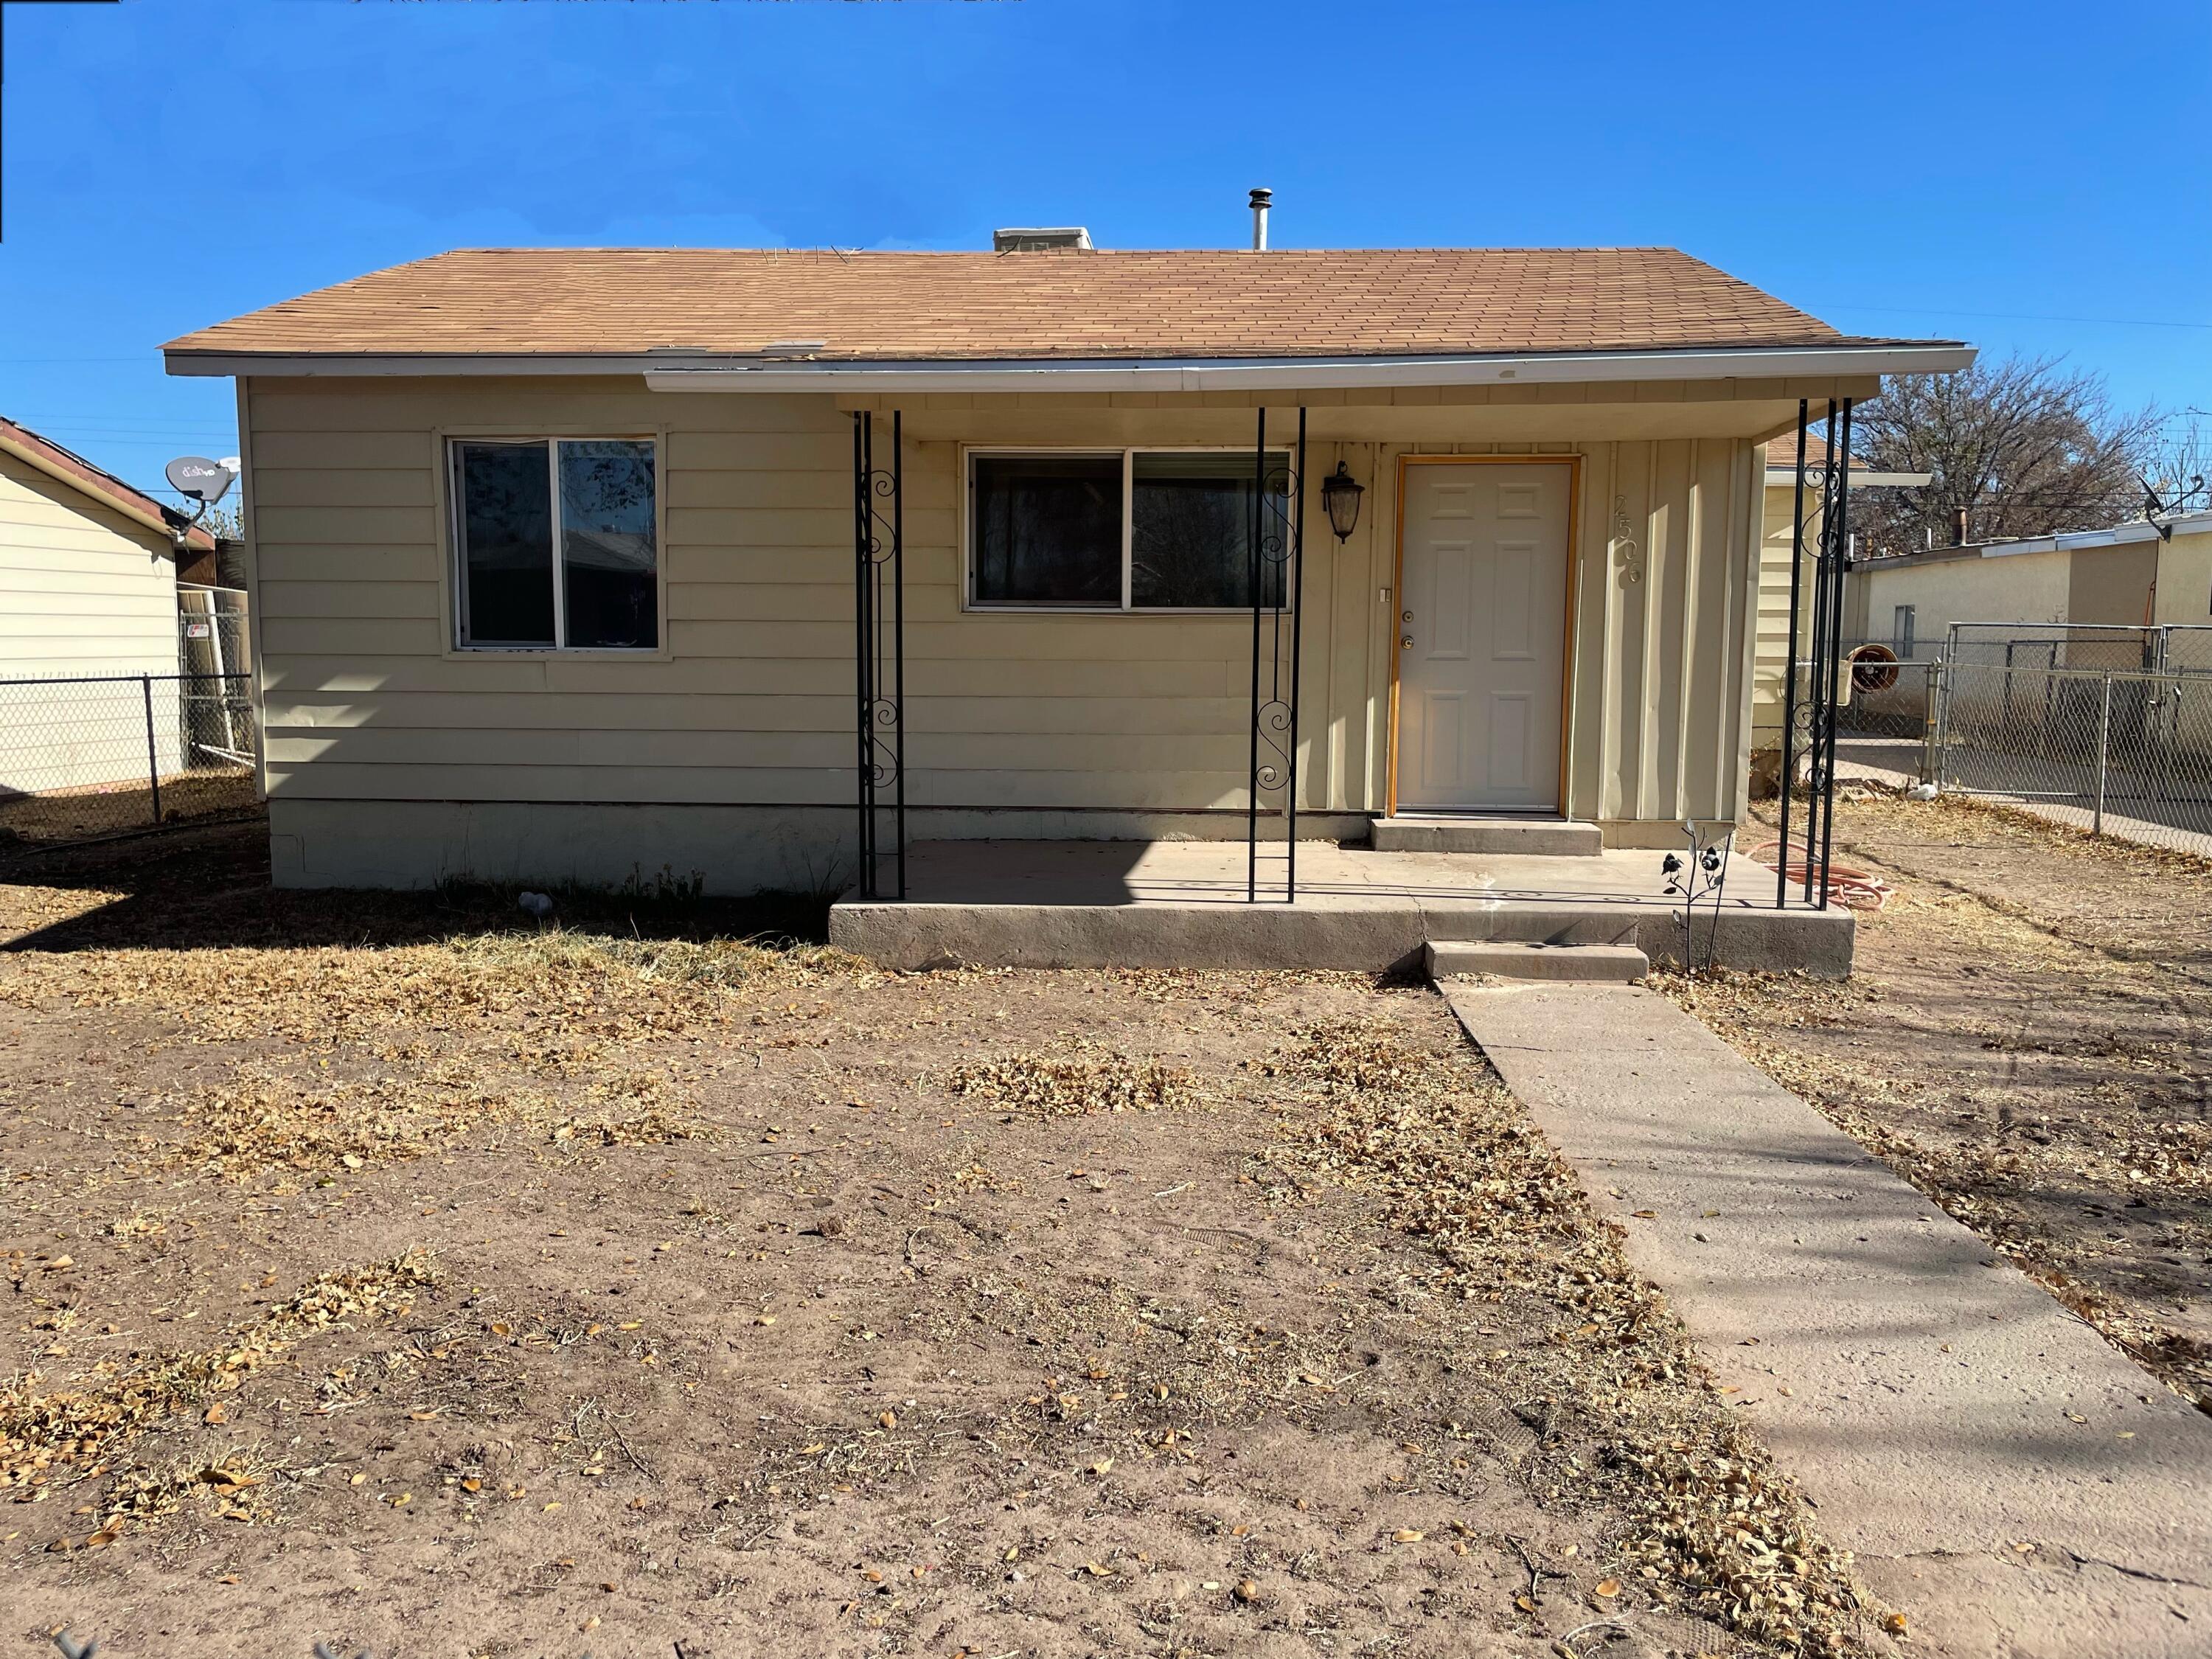 You don't want to miss out on this unique south valley home. This home sits on a large lot perfect for activities. The 2 car detached garage is also attached to a small 1bd 1 ba. Backyard access on both sides of home. Make it yours today!